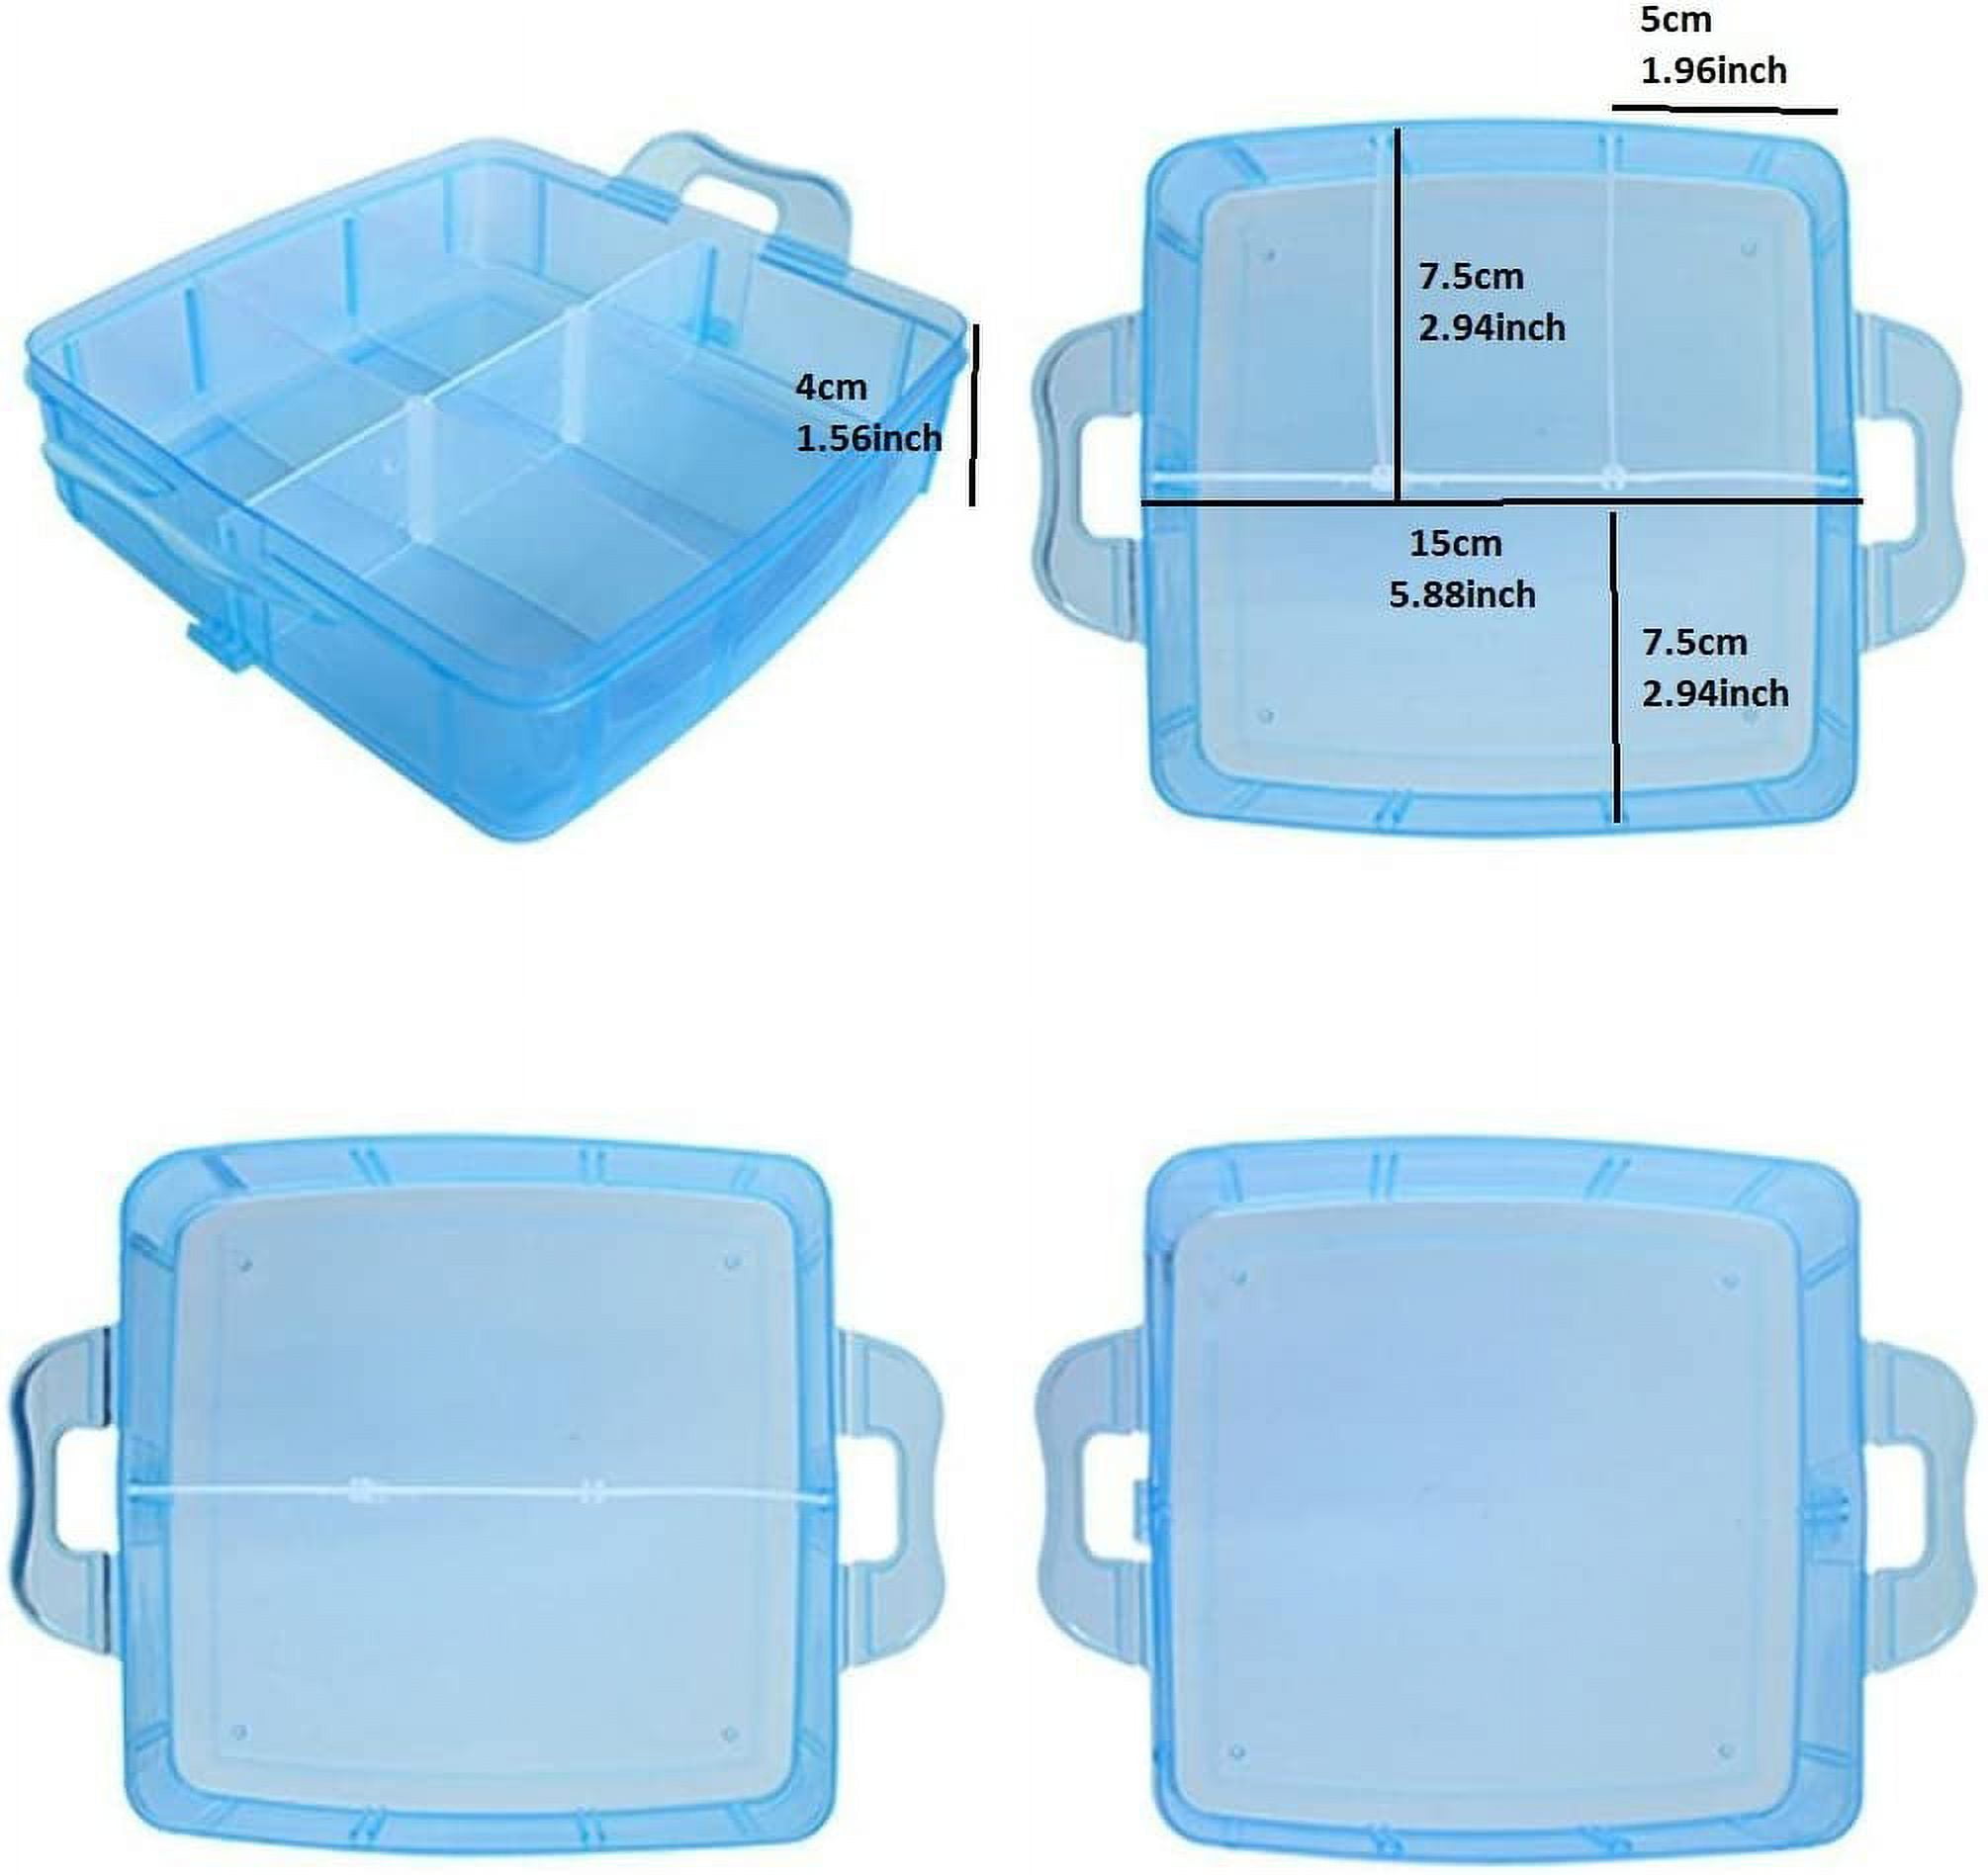 Tidy Crafts Bead Organizer-24 Containers Quad Stow N Go Organizer W/  Turntable and FREE Funnel Tray 